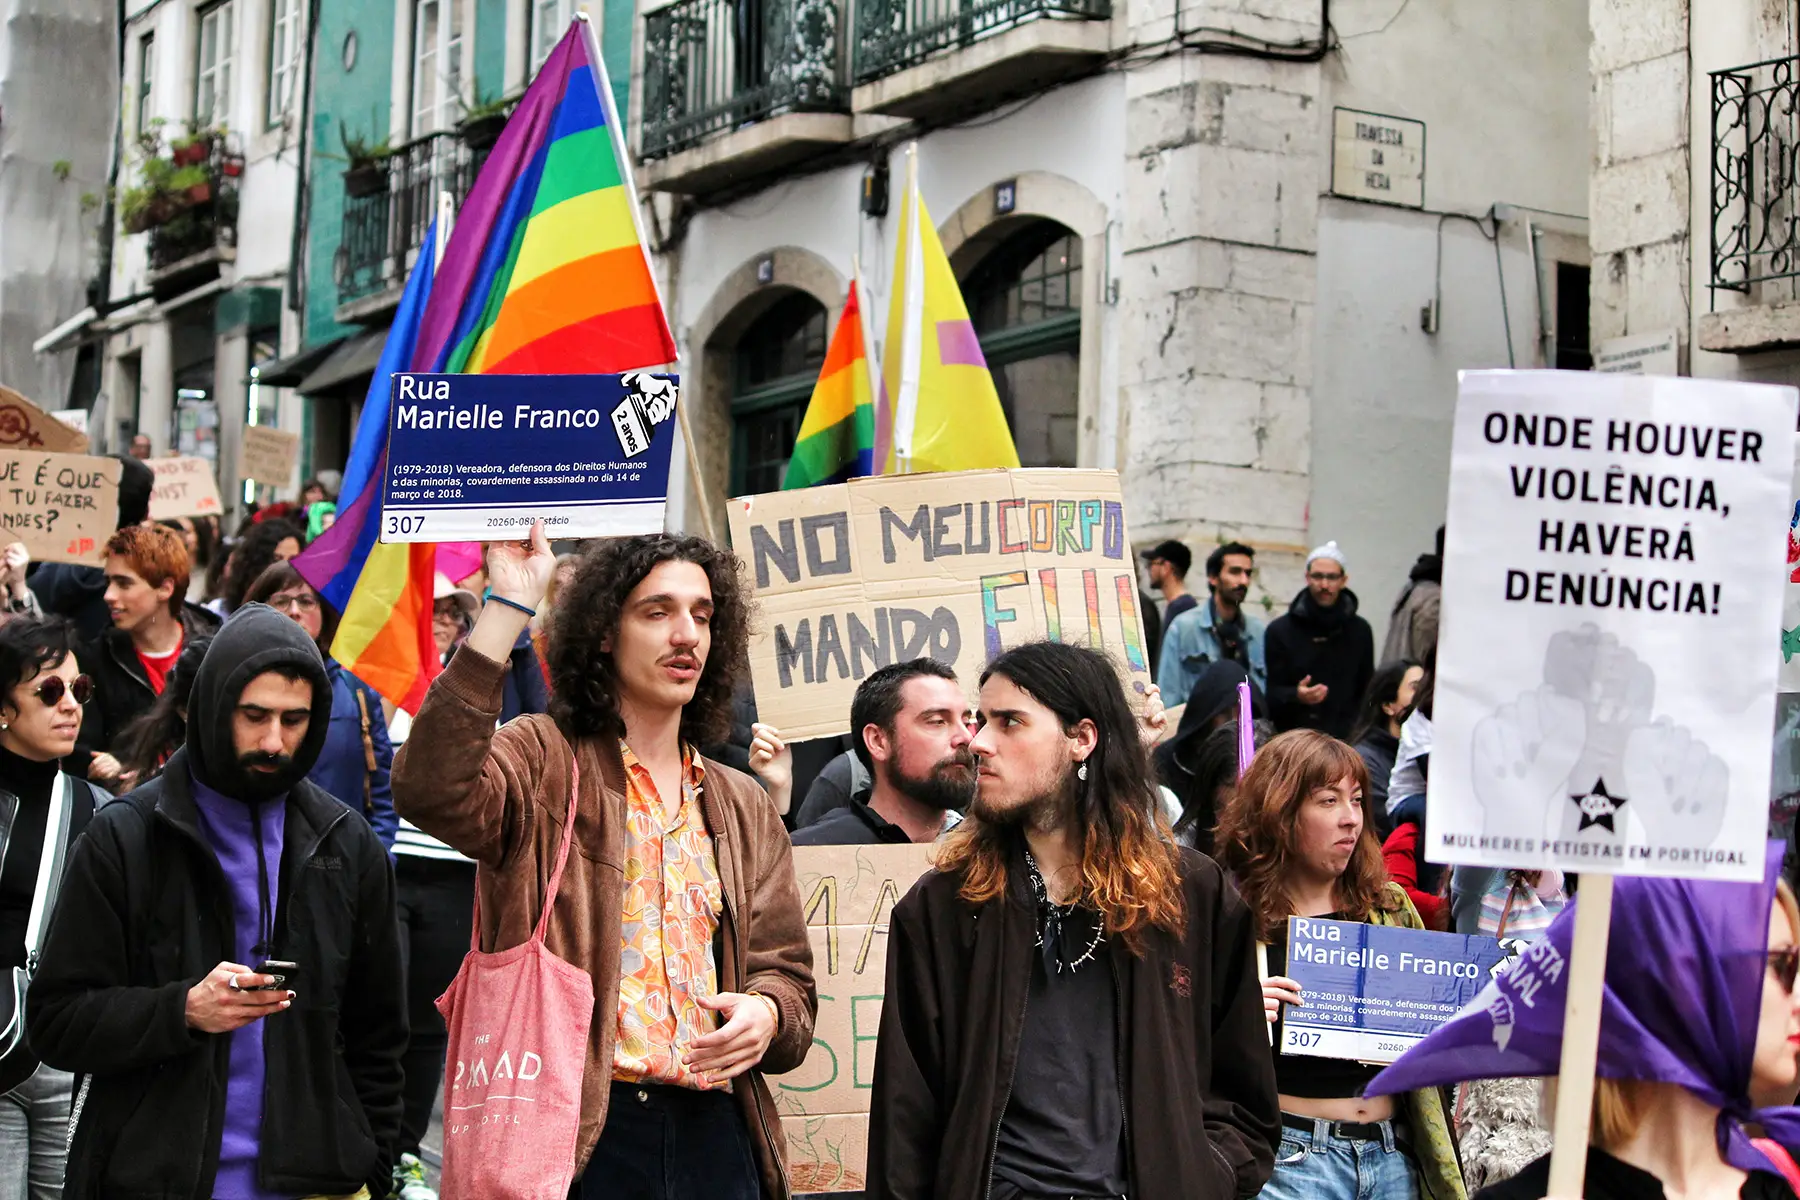 Protest against sexual violence in Lisbon